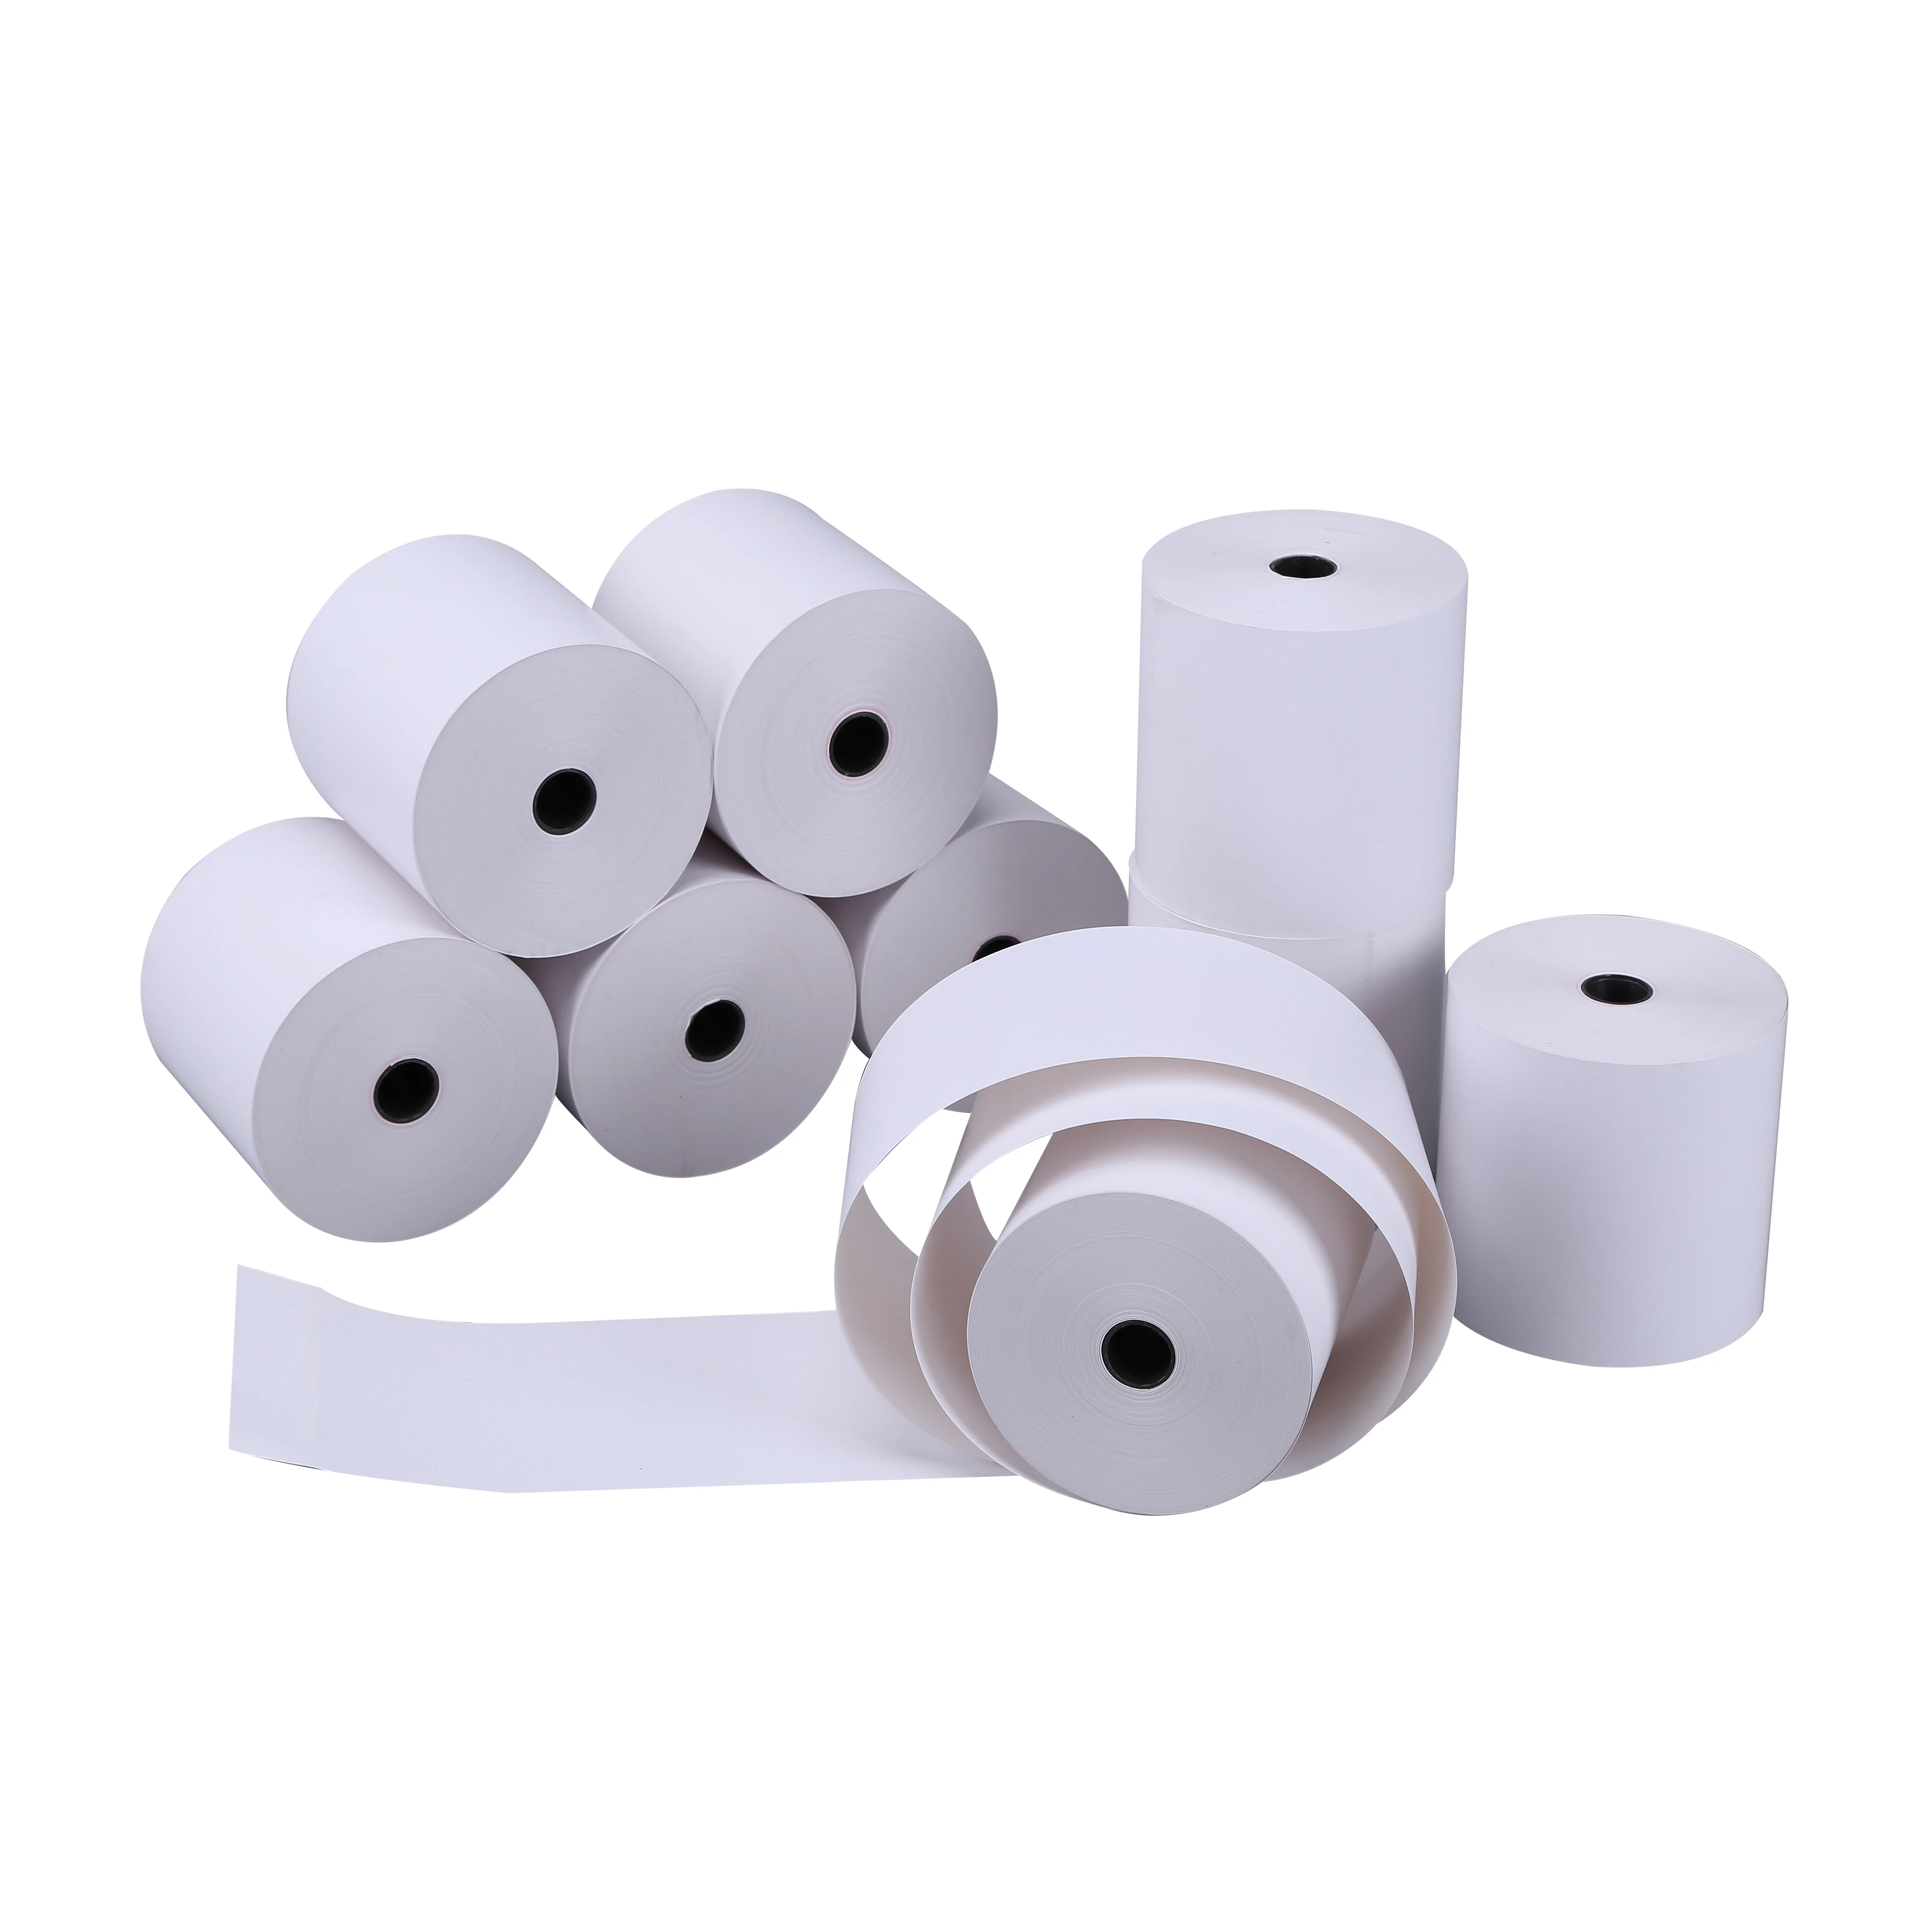 Wholesale price 80mm*80mm plain thermal paper roll 55gsm china paper manufacturer